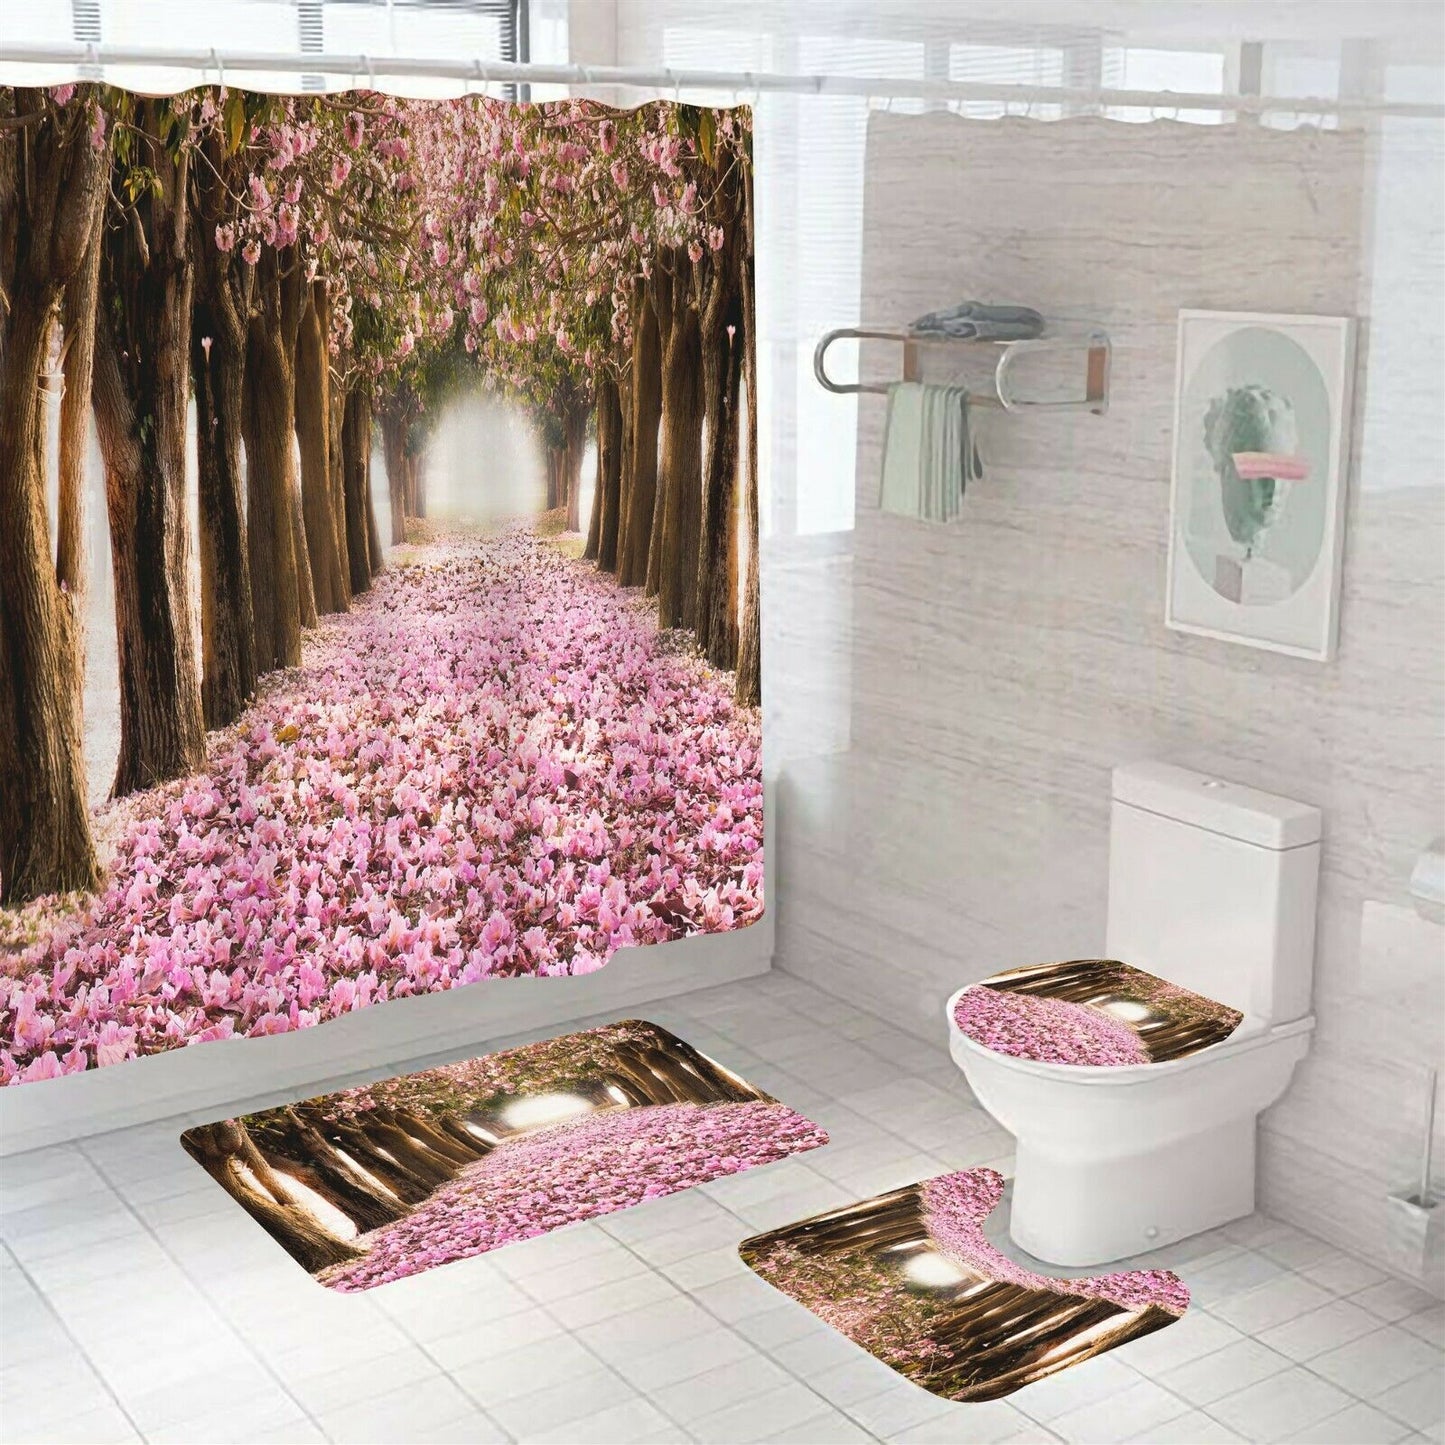 Floral Shower Curtain Bathroom Rug Set Bath Mat Non-Slip Toilet Lid Cover-Shower Curtain+3Pcs Mat-Free Shipping at meselling99